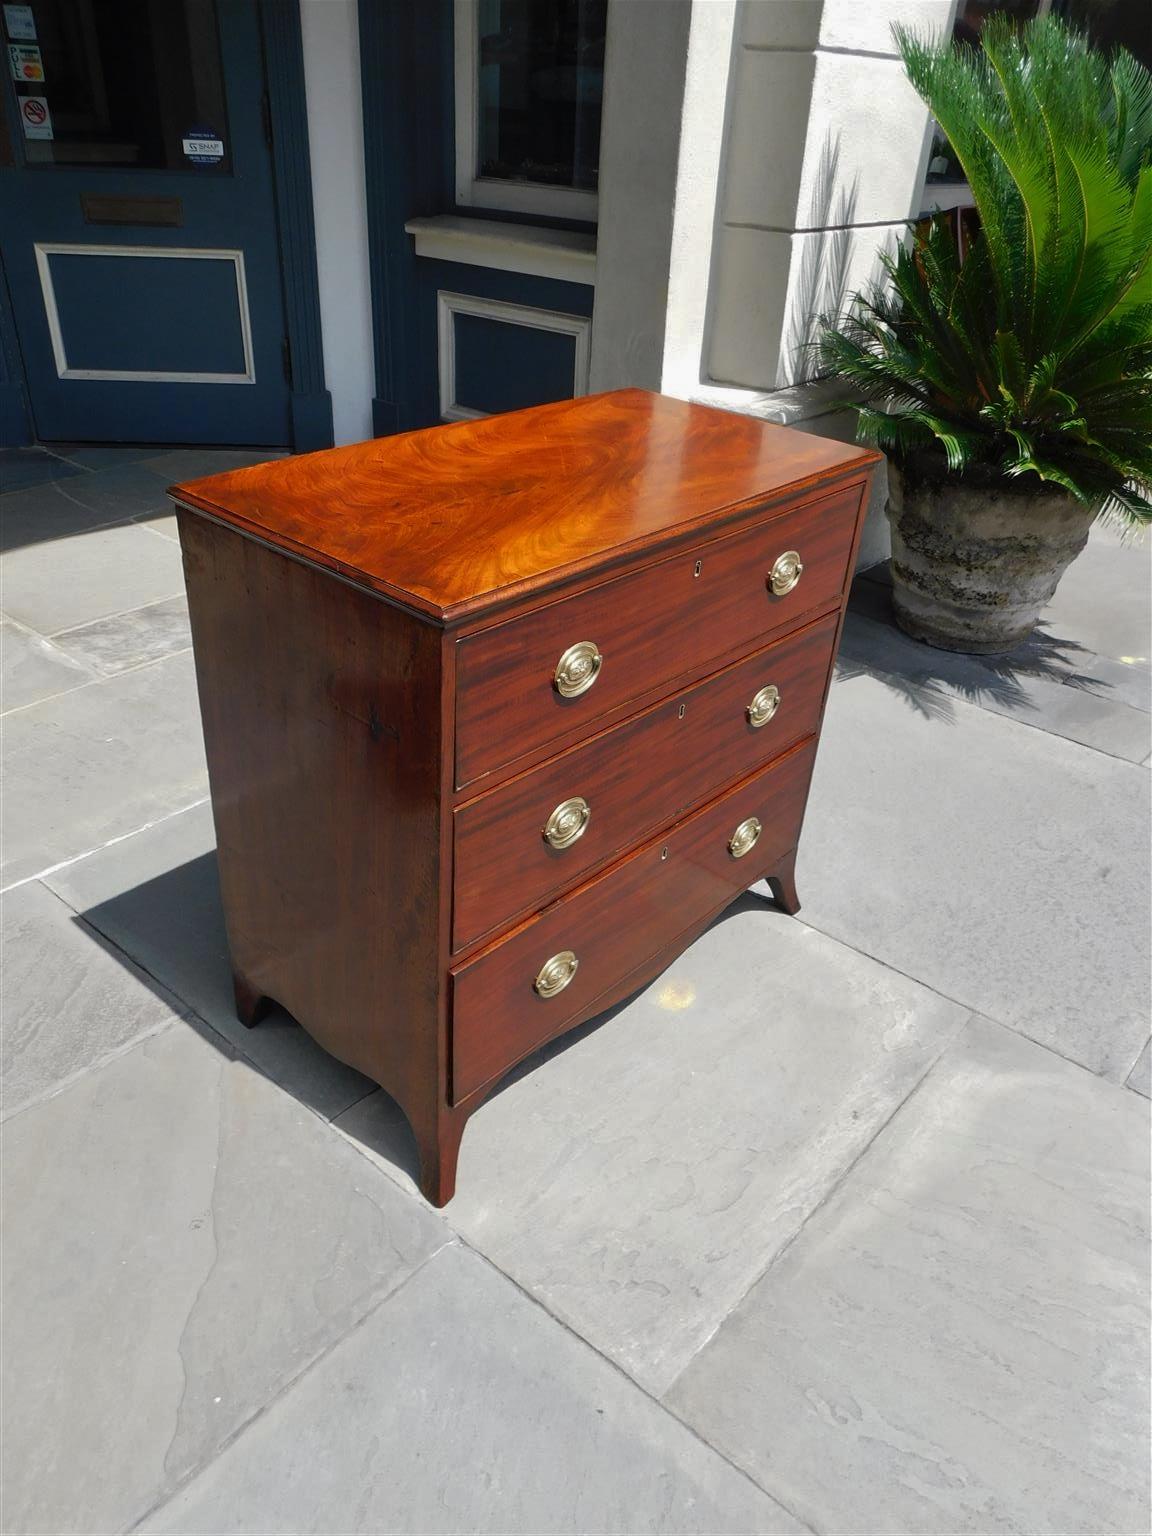 Hand-Carved English Hepplewhite Mahogany Graduated Chest of Drawers with Orig. Brasses, 1770